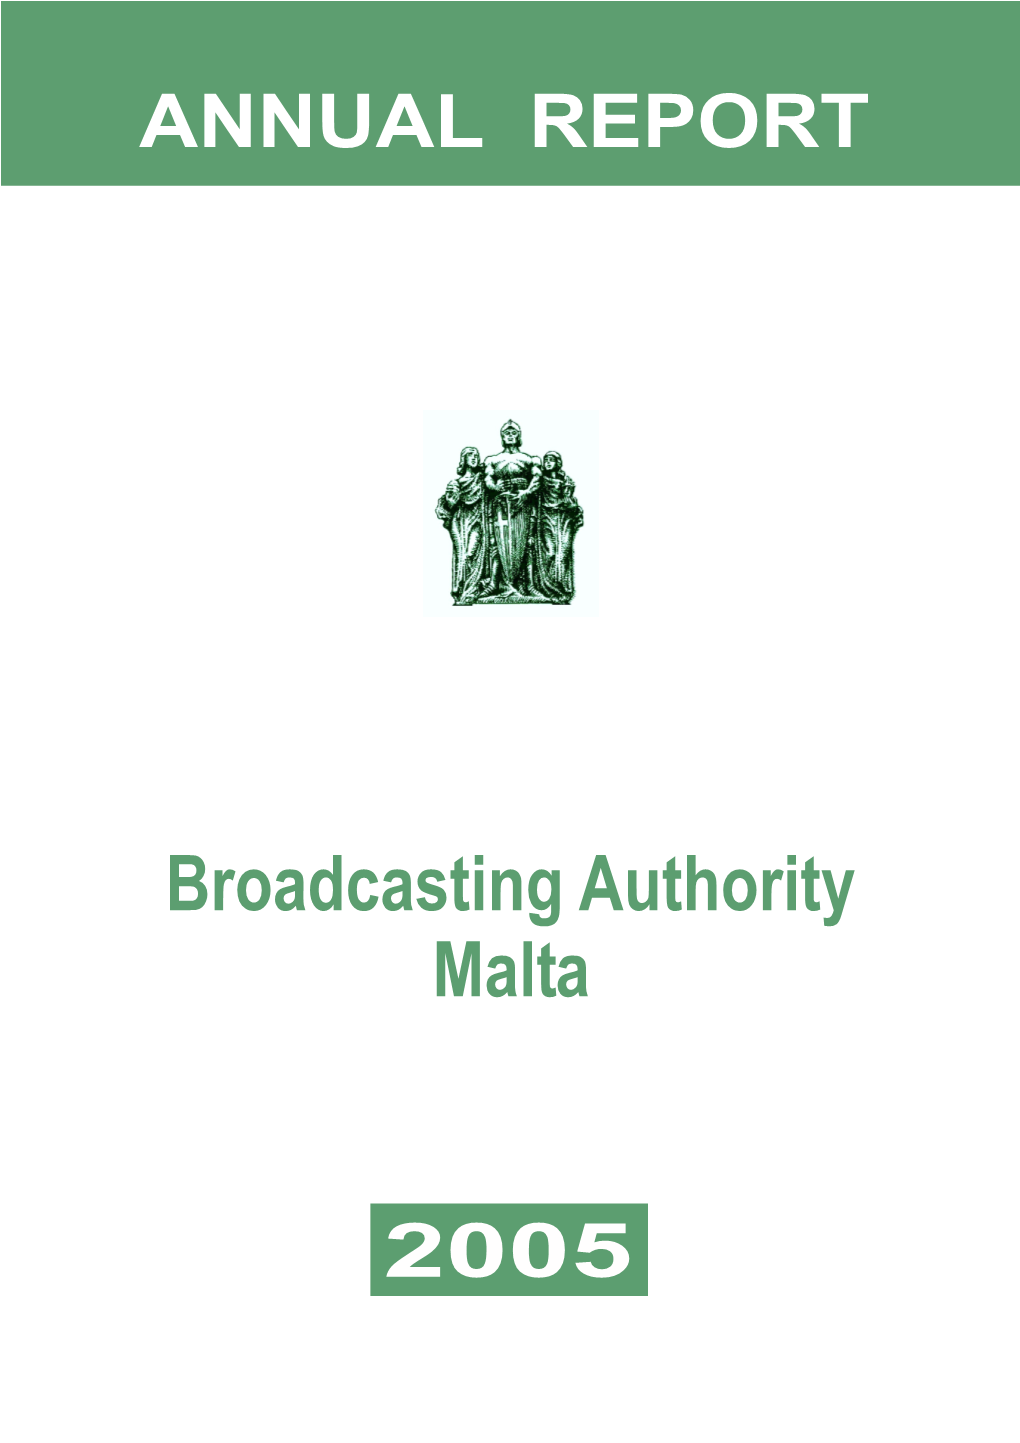 Broadcasting Authority Report and Financial Statements